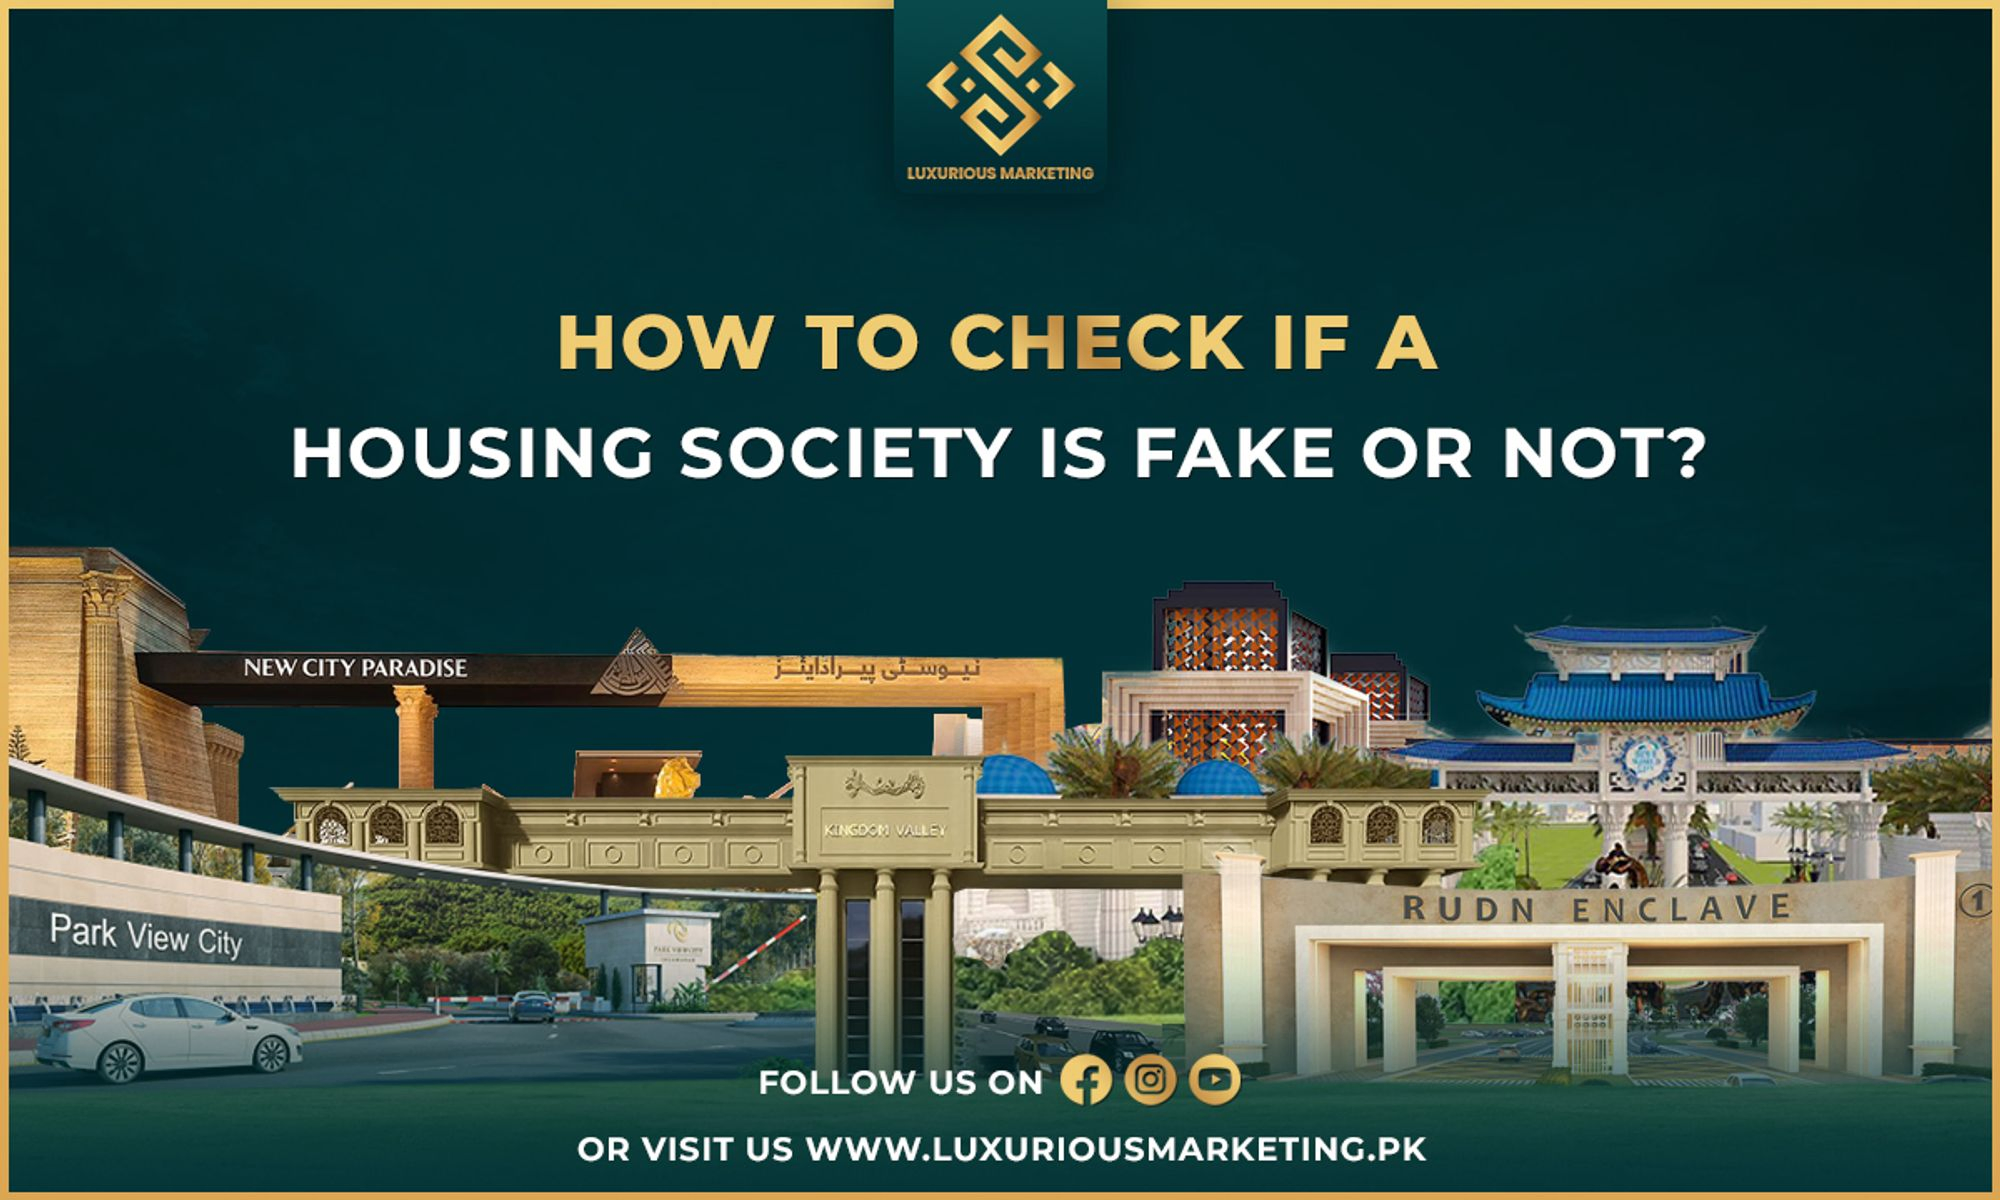 How To Check Fake Housing Society Blog Banner